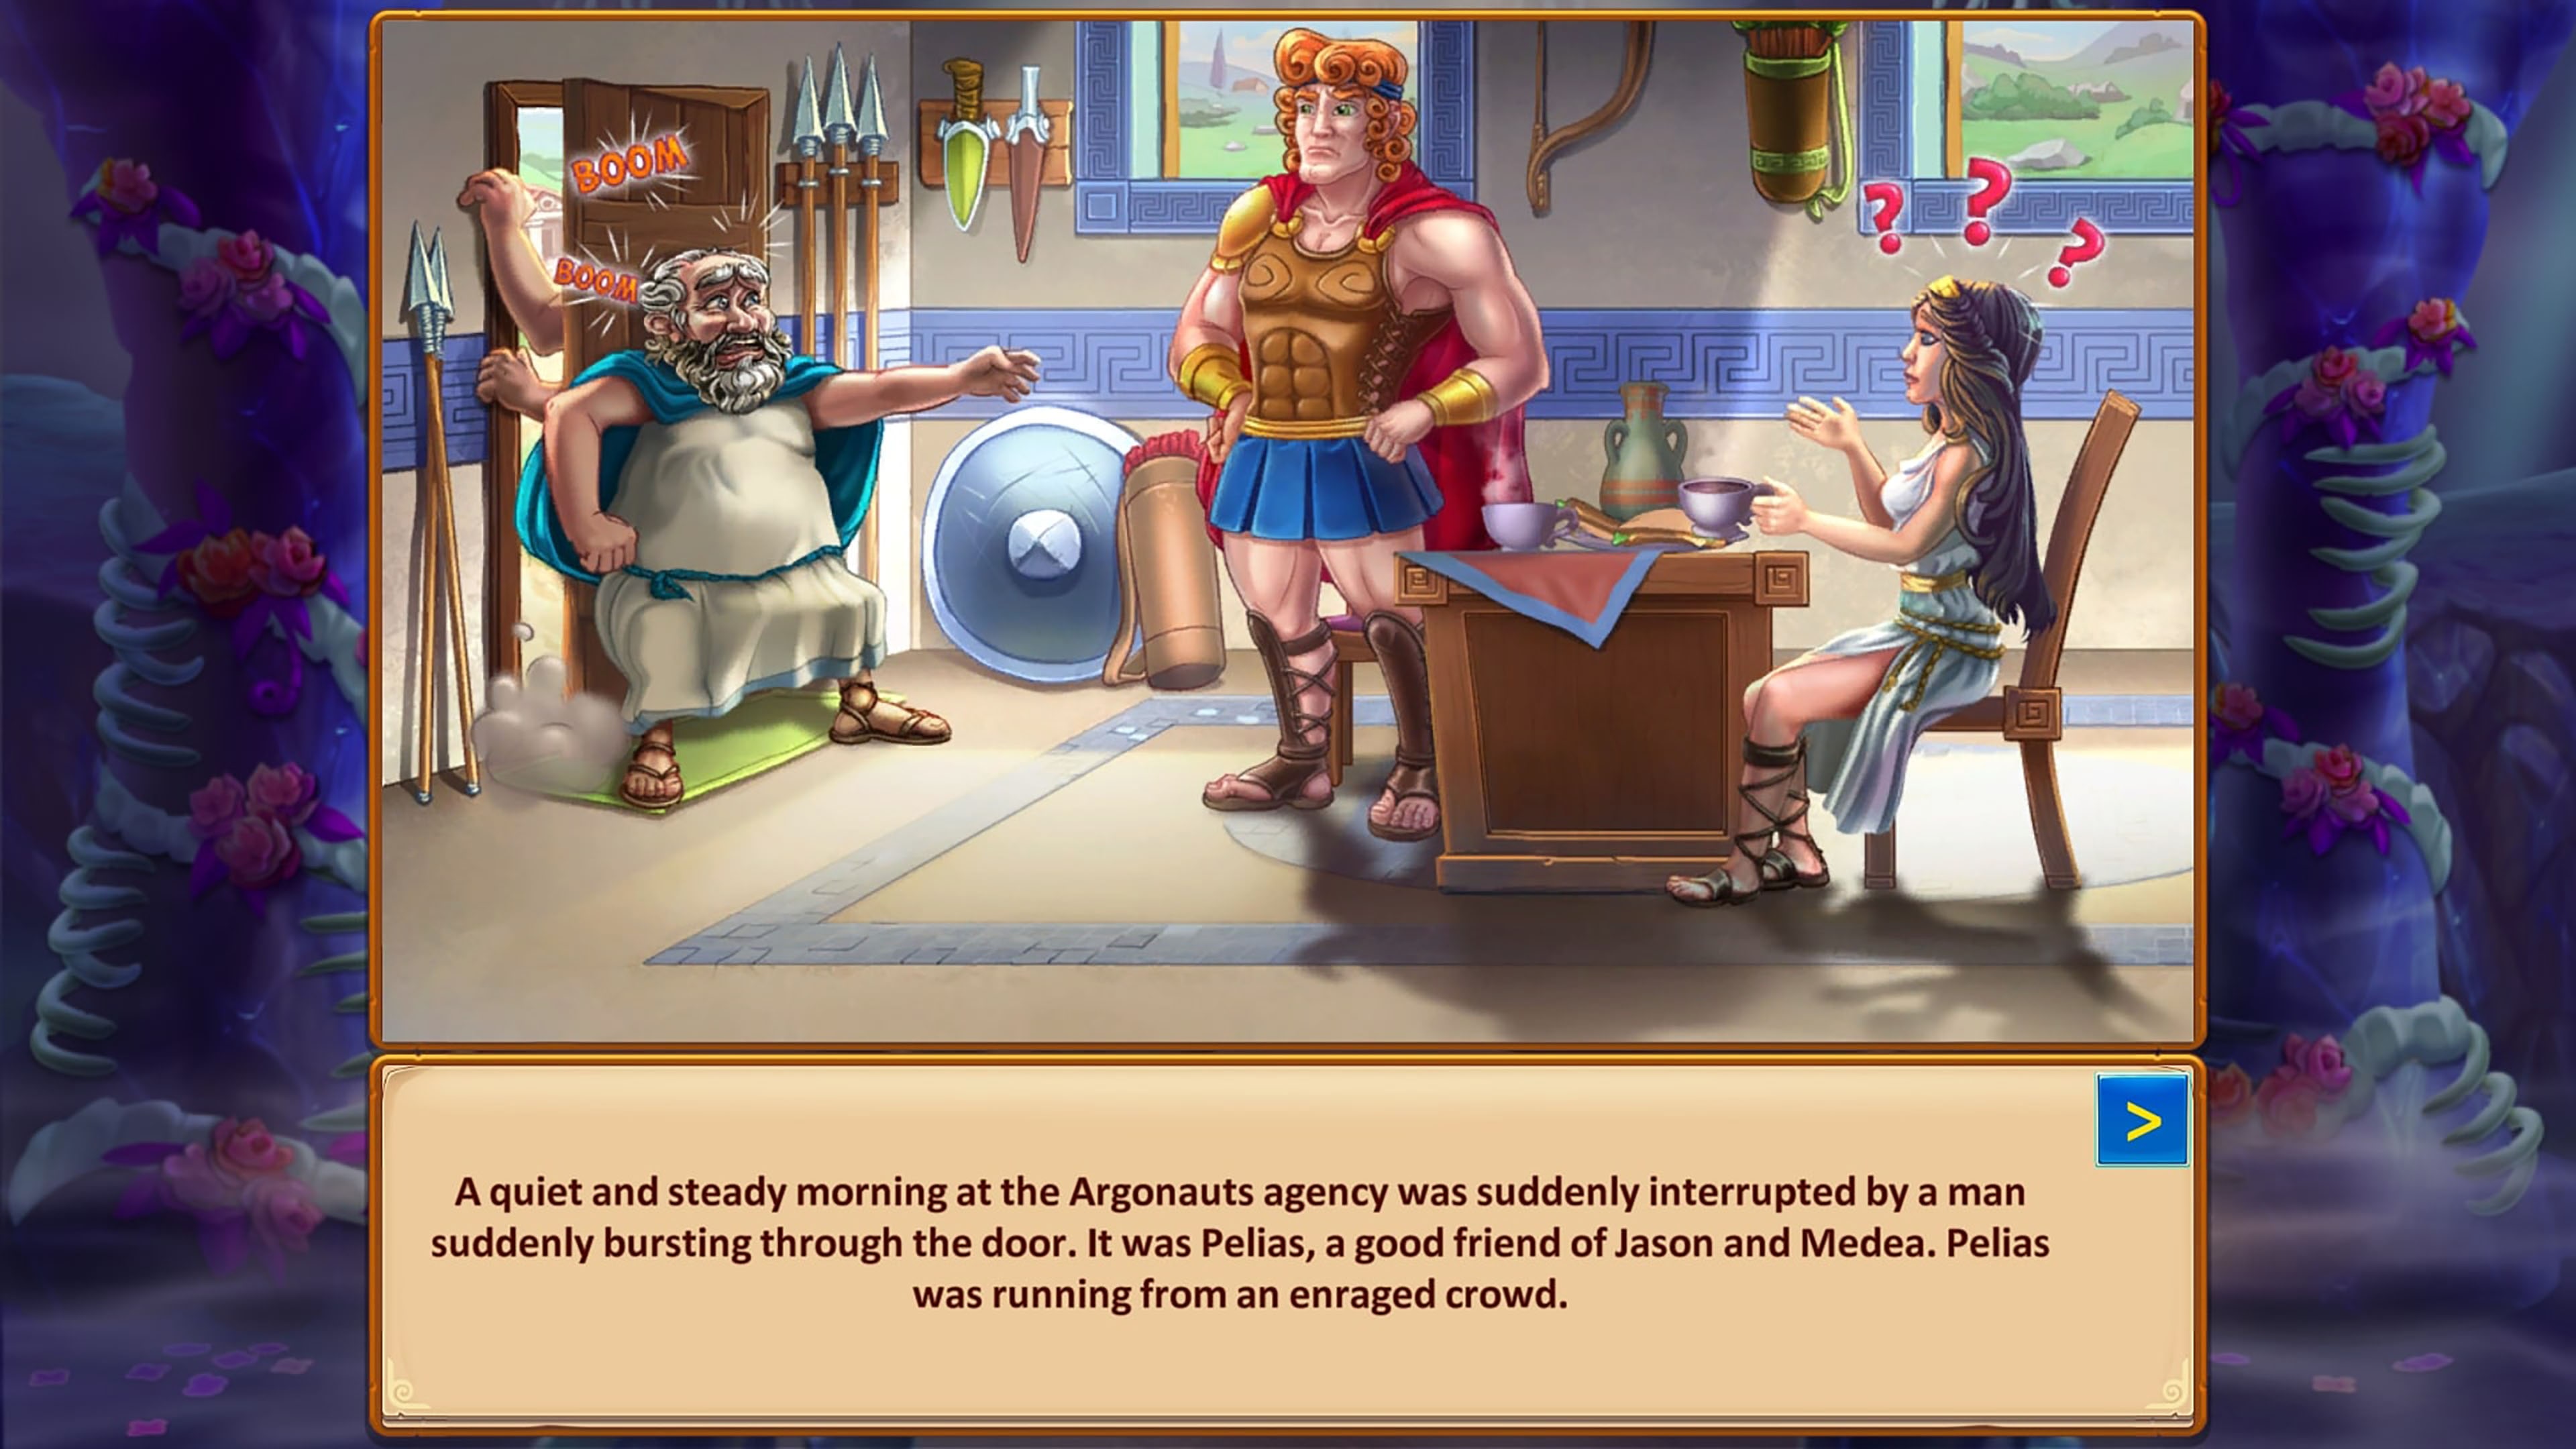 Argonauts Agency - Captive of Circe Collector's Edition - Play